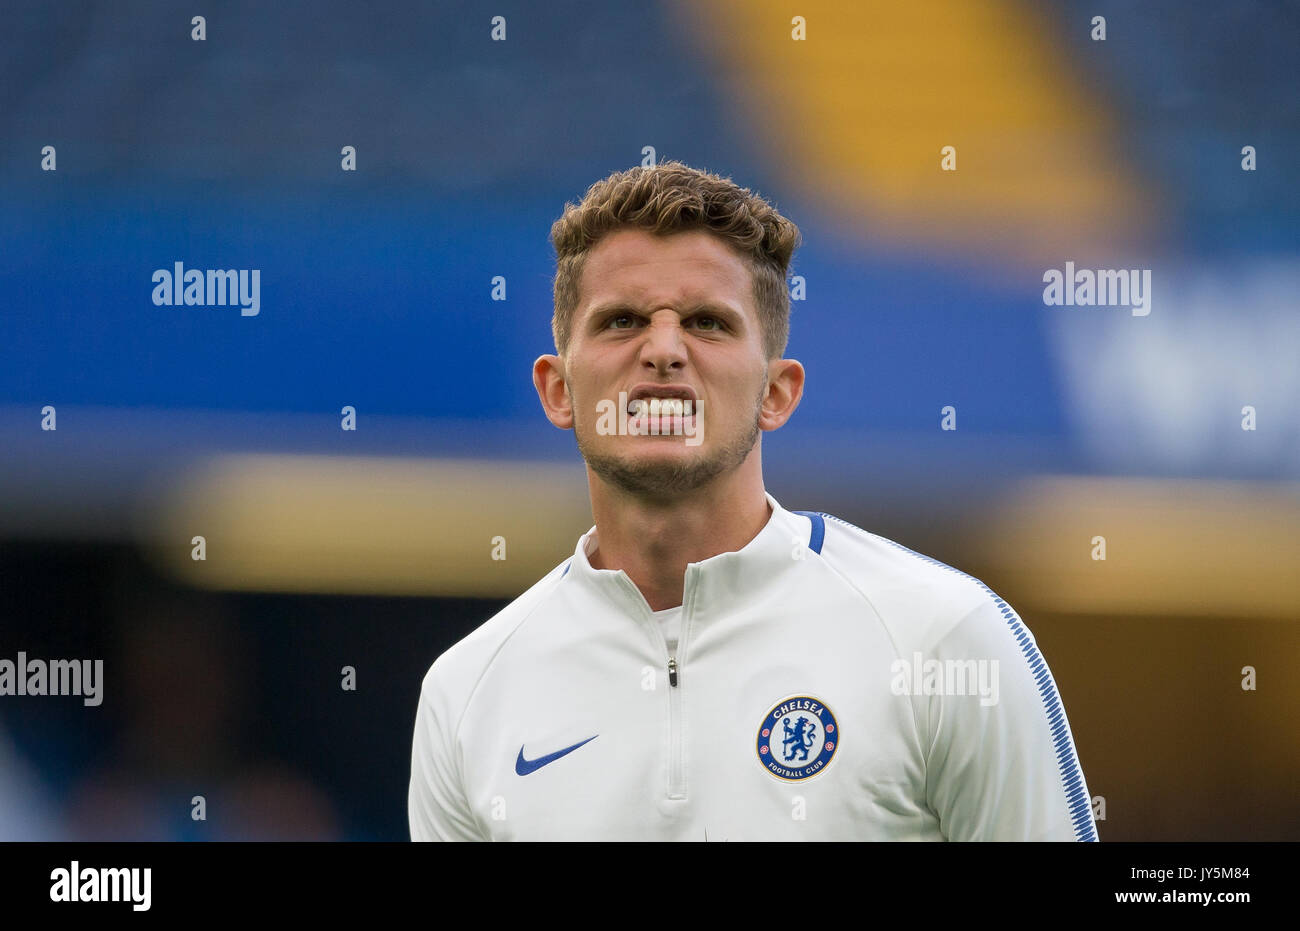 London, UK. 18th Aug, 2017.   Jordan HOUGHTON of Chelsea during the U23 Premier League 2 match between Chelsea and Derby County at Stamford Bridge, London, England on 18 August 2017. Photo by Andy Rowland. **EDITORIAL USE ONLY FA Premier League and Football League are subject to DataCo Licence. Credit: Andrew Rowland/Alamy Live News Credit: Andrew Rowland/Alamy Live News Stock Photo